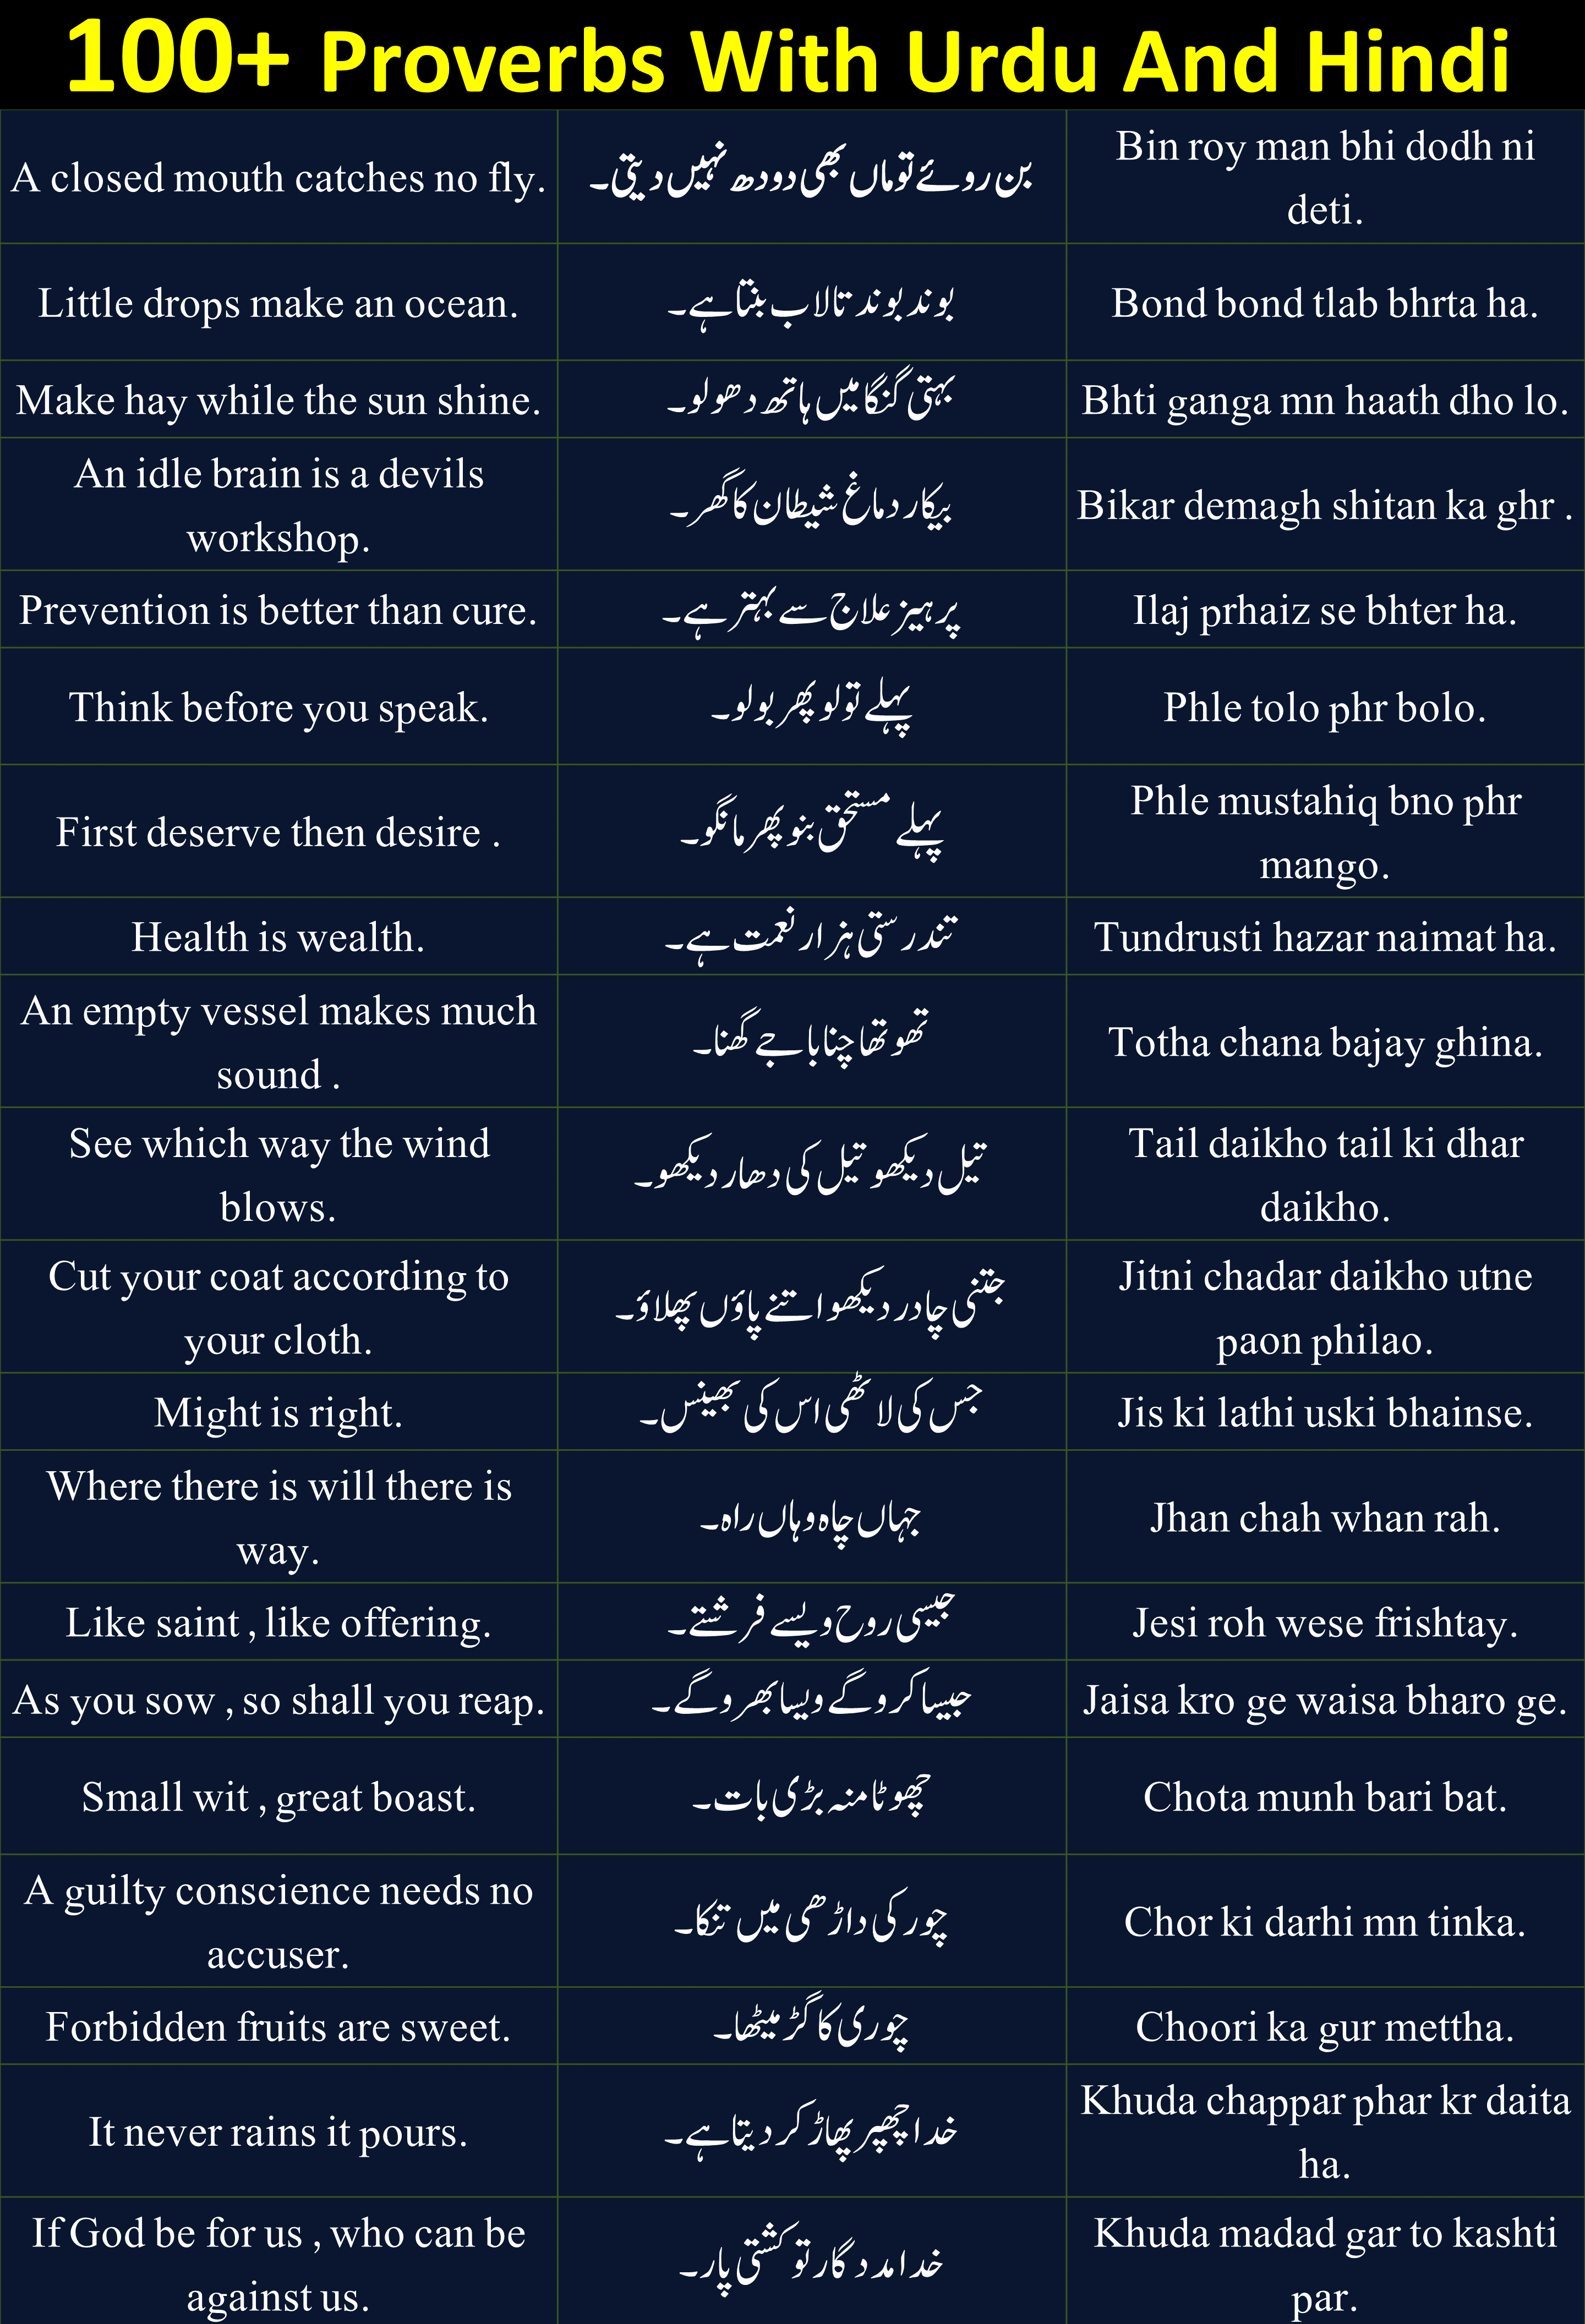 100+ Proverbs With Urdu And Hindi Examples